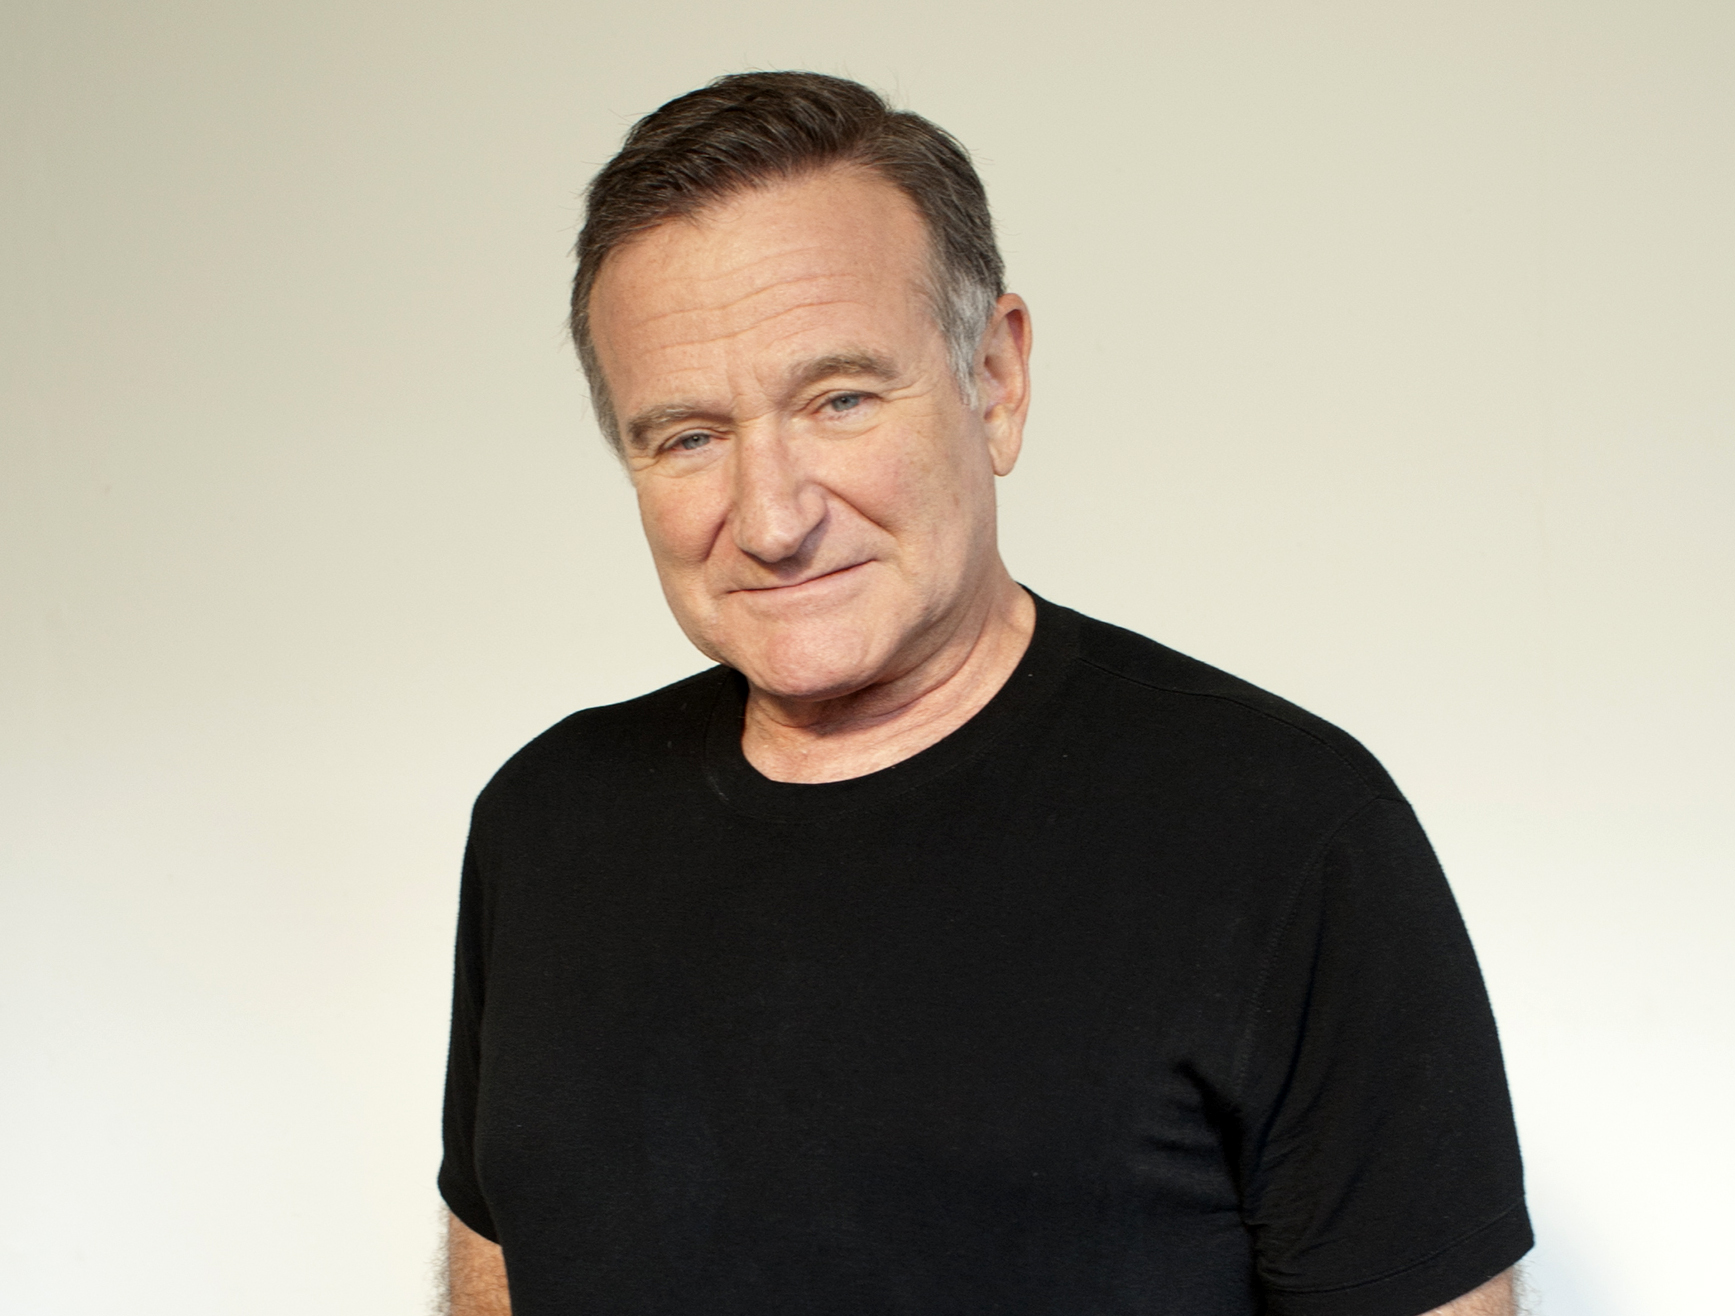 Late comedian Robin Williams played the Scottish nanny